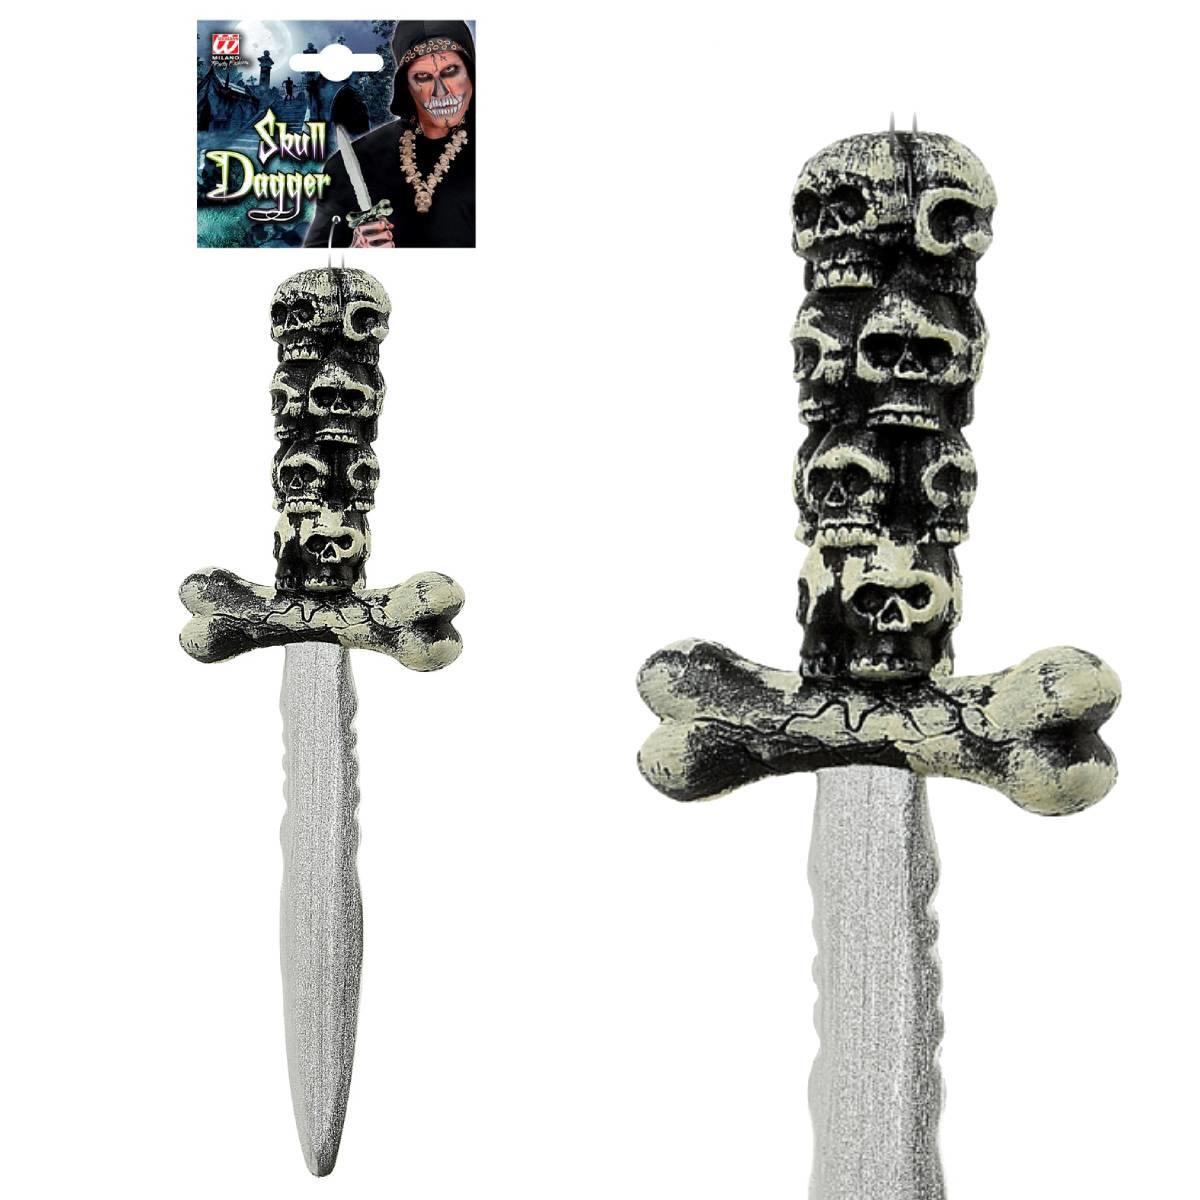 Skull Dagger for Pirate costumes or Voodoo Outfits by Widmann 8600K available here at Karnival Costumes online party shop